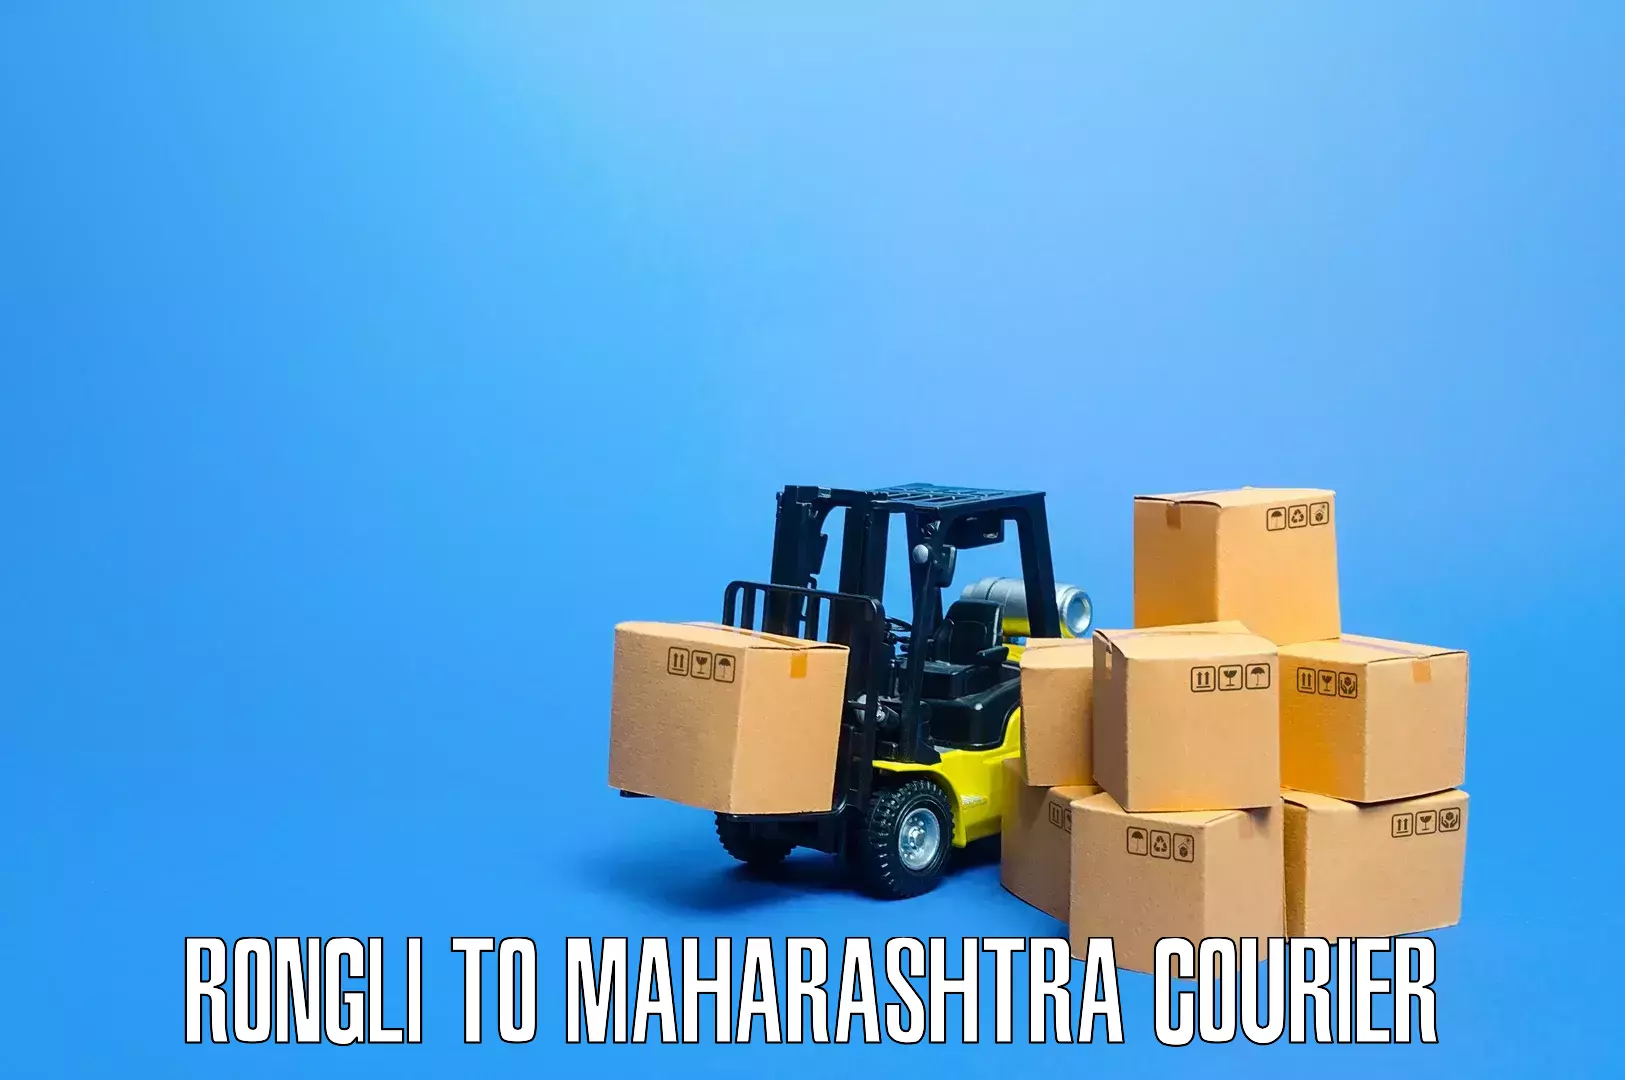 Furniture transport services in Rongli to Maharashtra